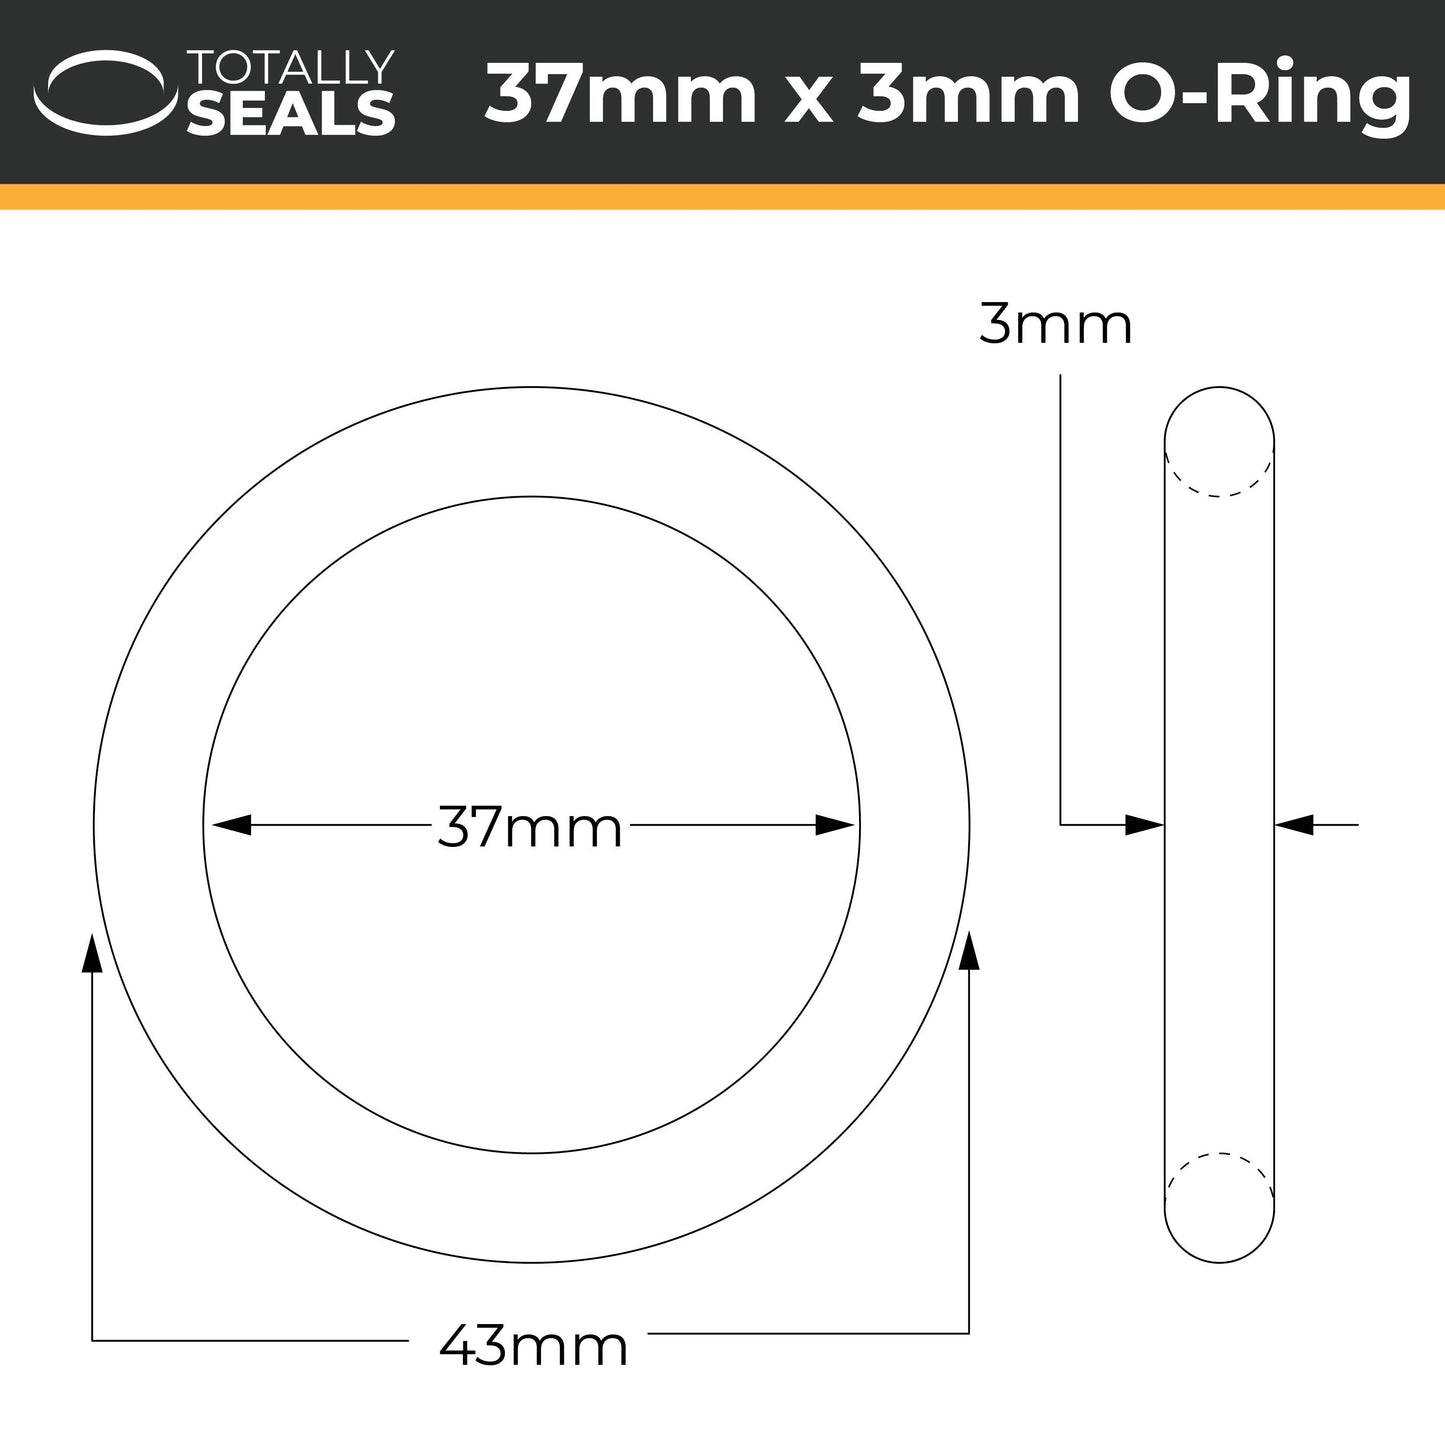 37mm x 3mm (43mm OD) Nitrile O-Rings - Totally Seals®